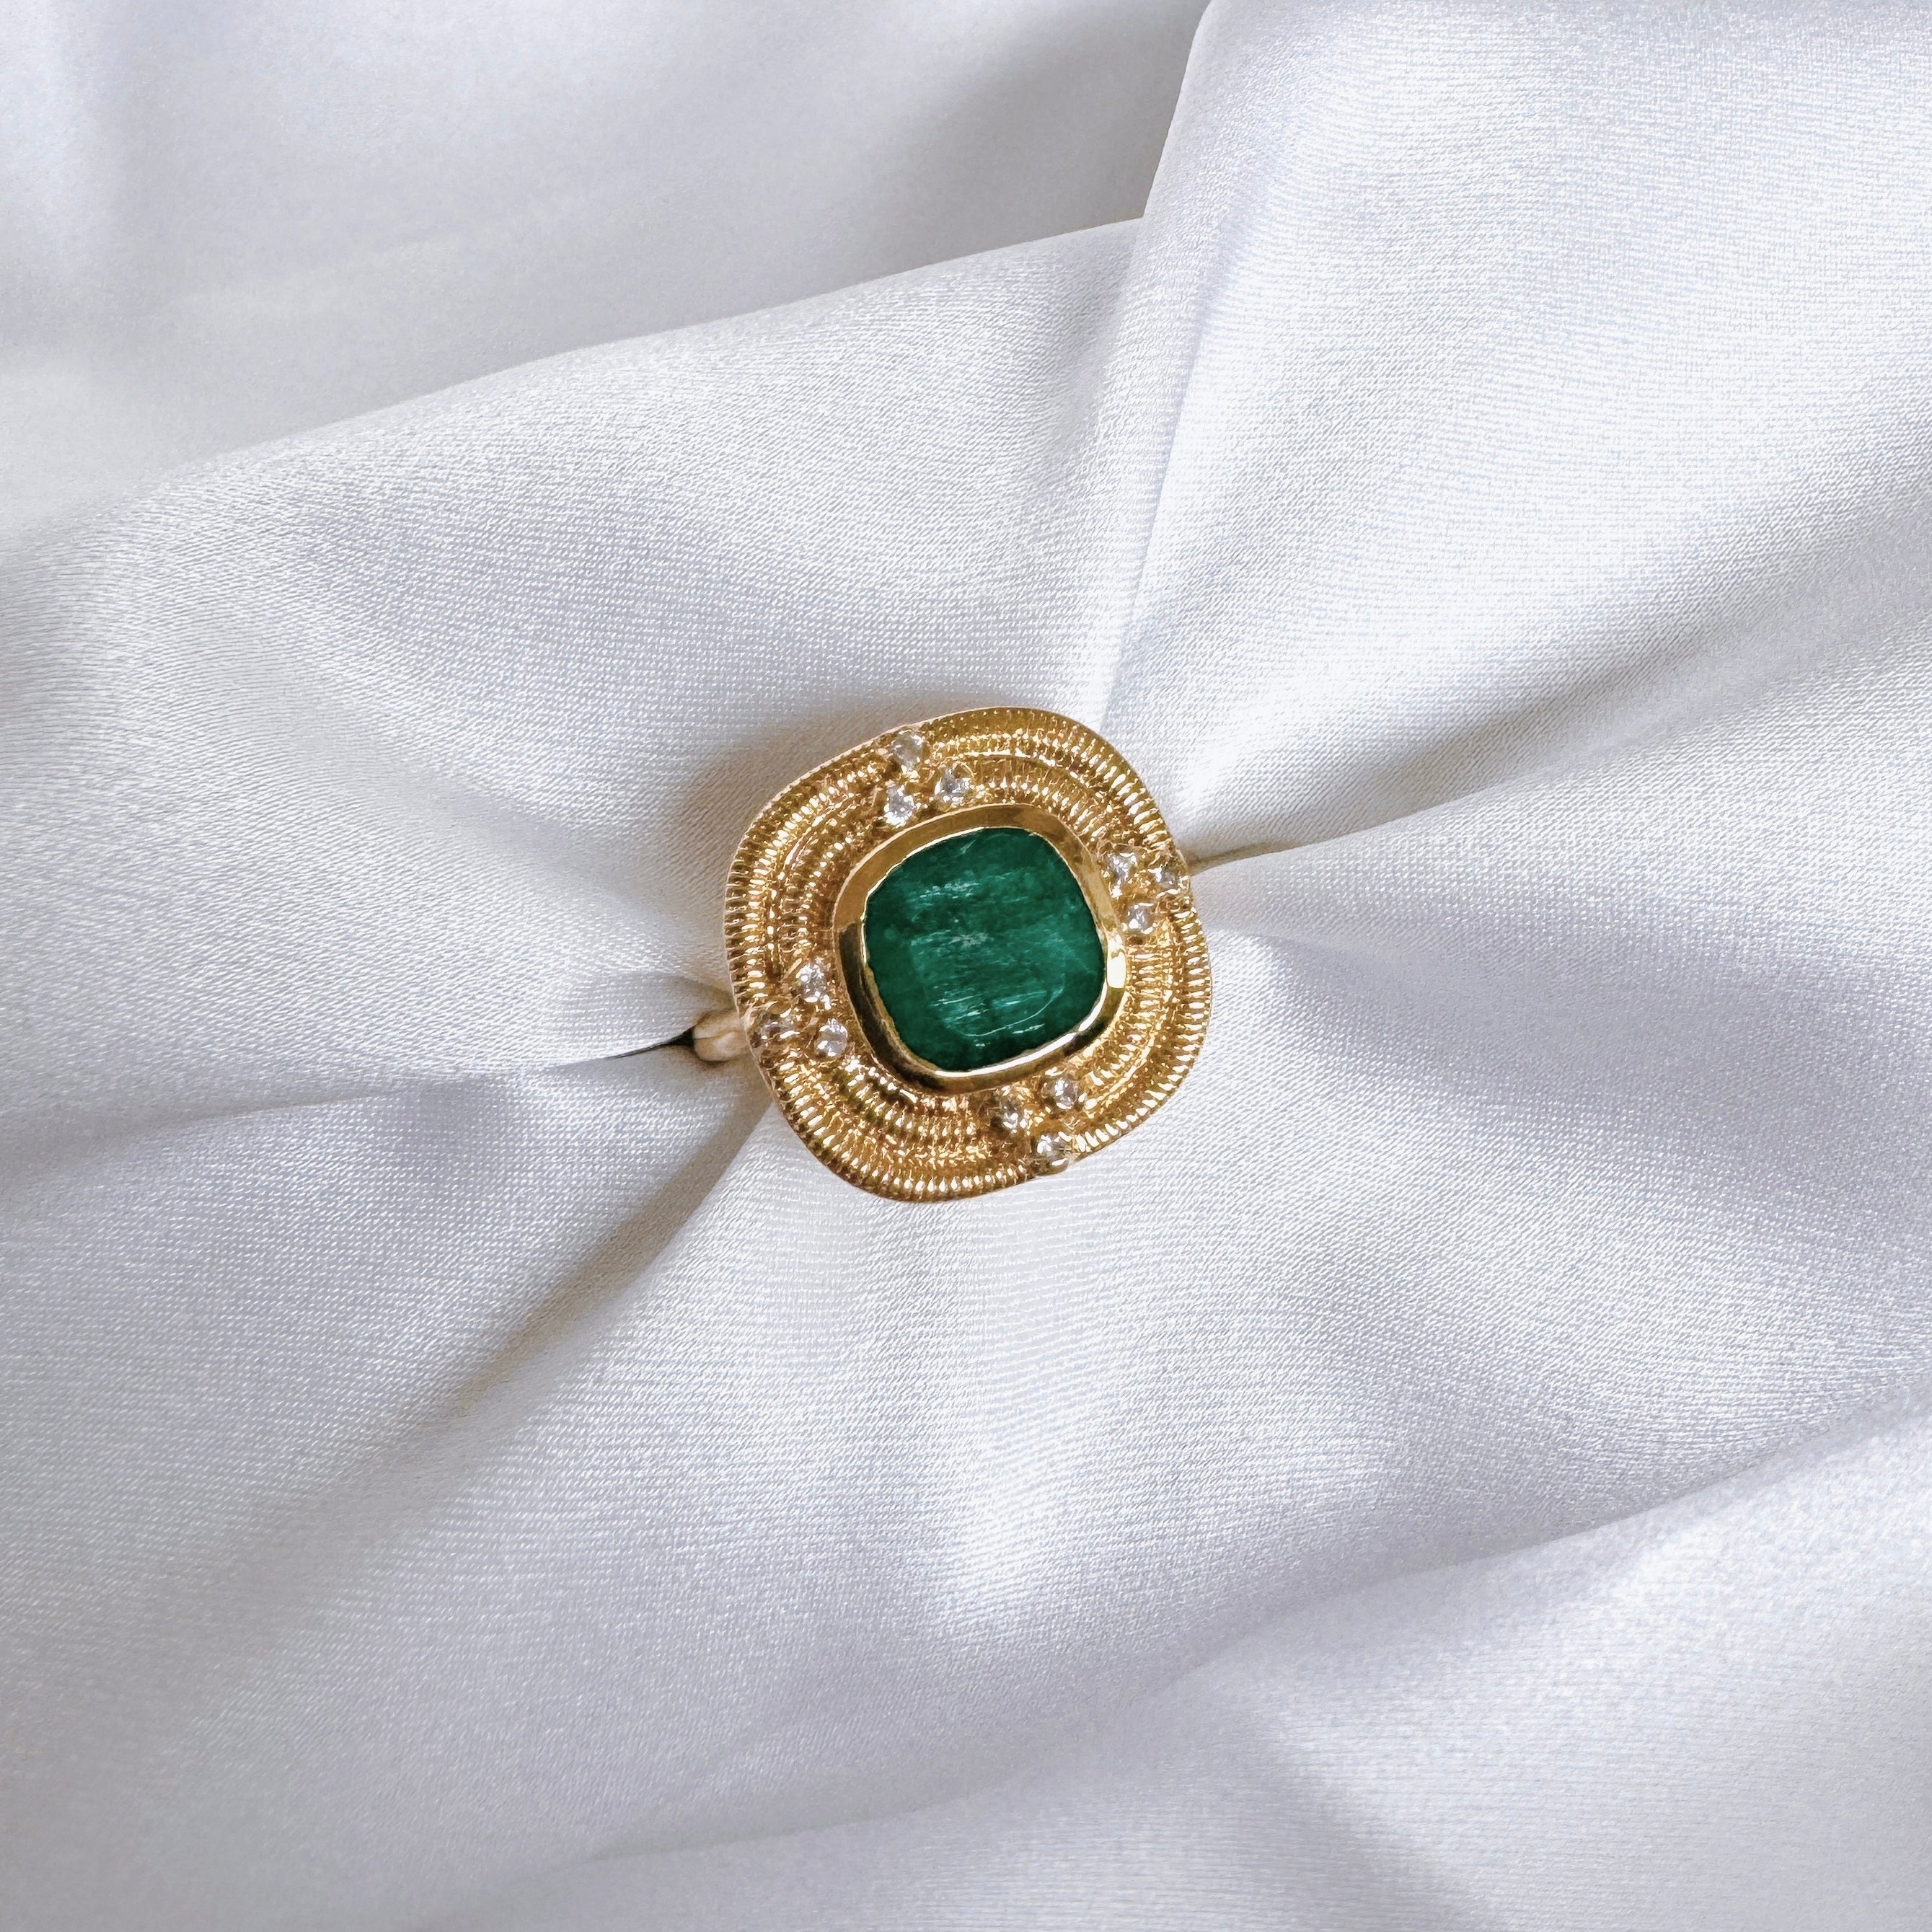 Gold-plated “Raw Emerald” ring